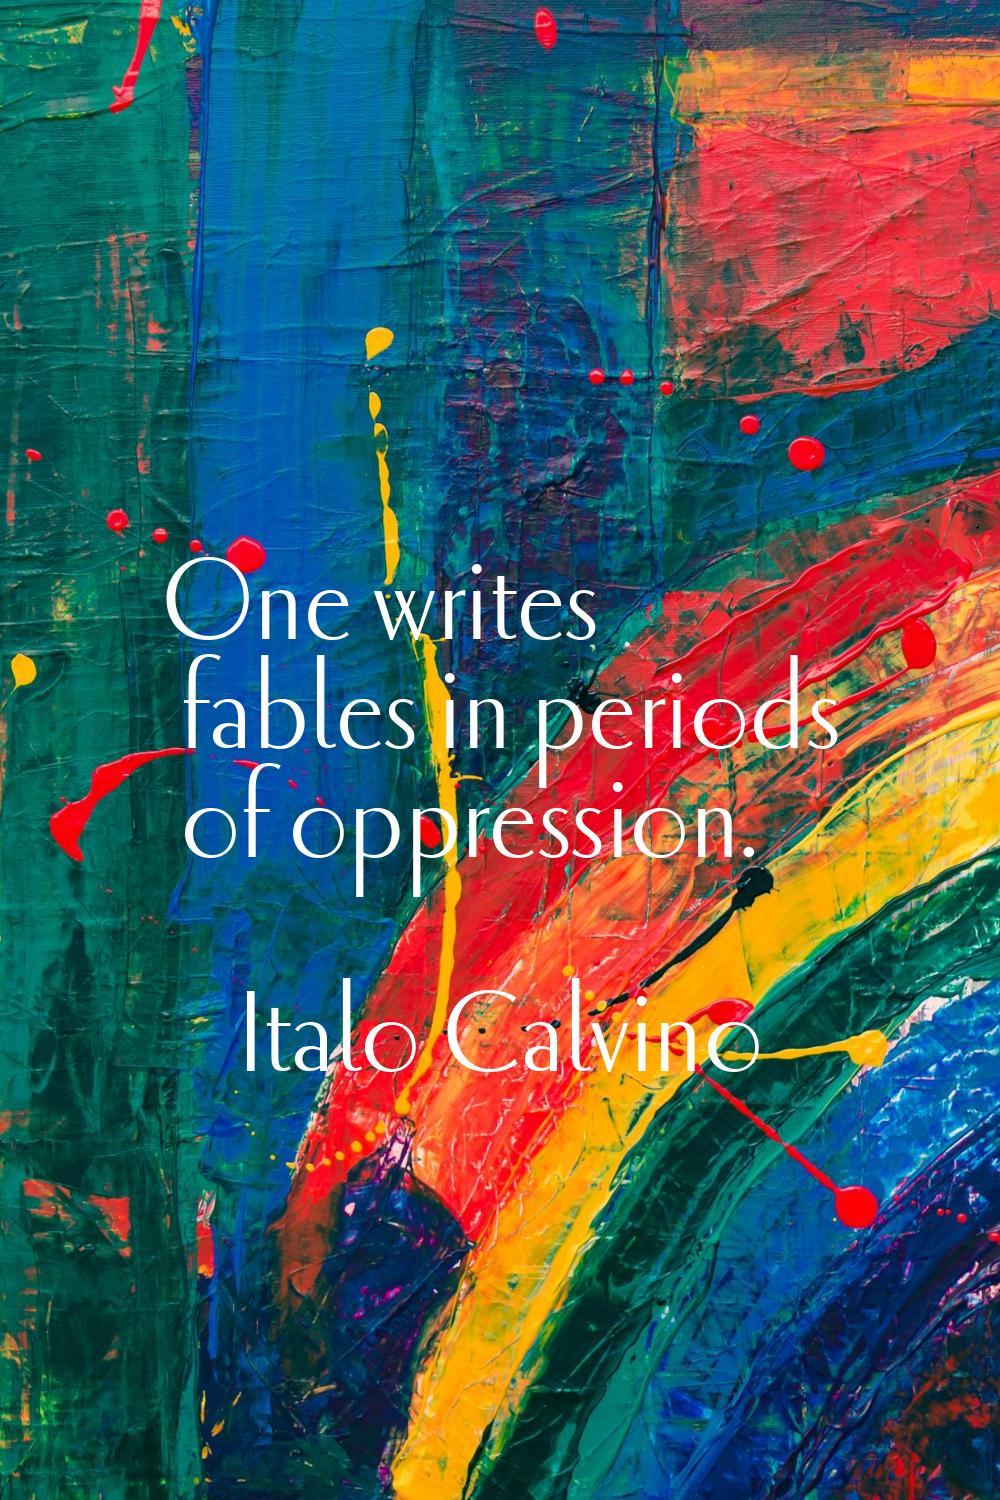 One writes fables in periods of oppression.